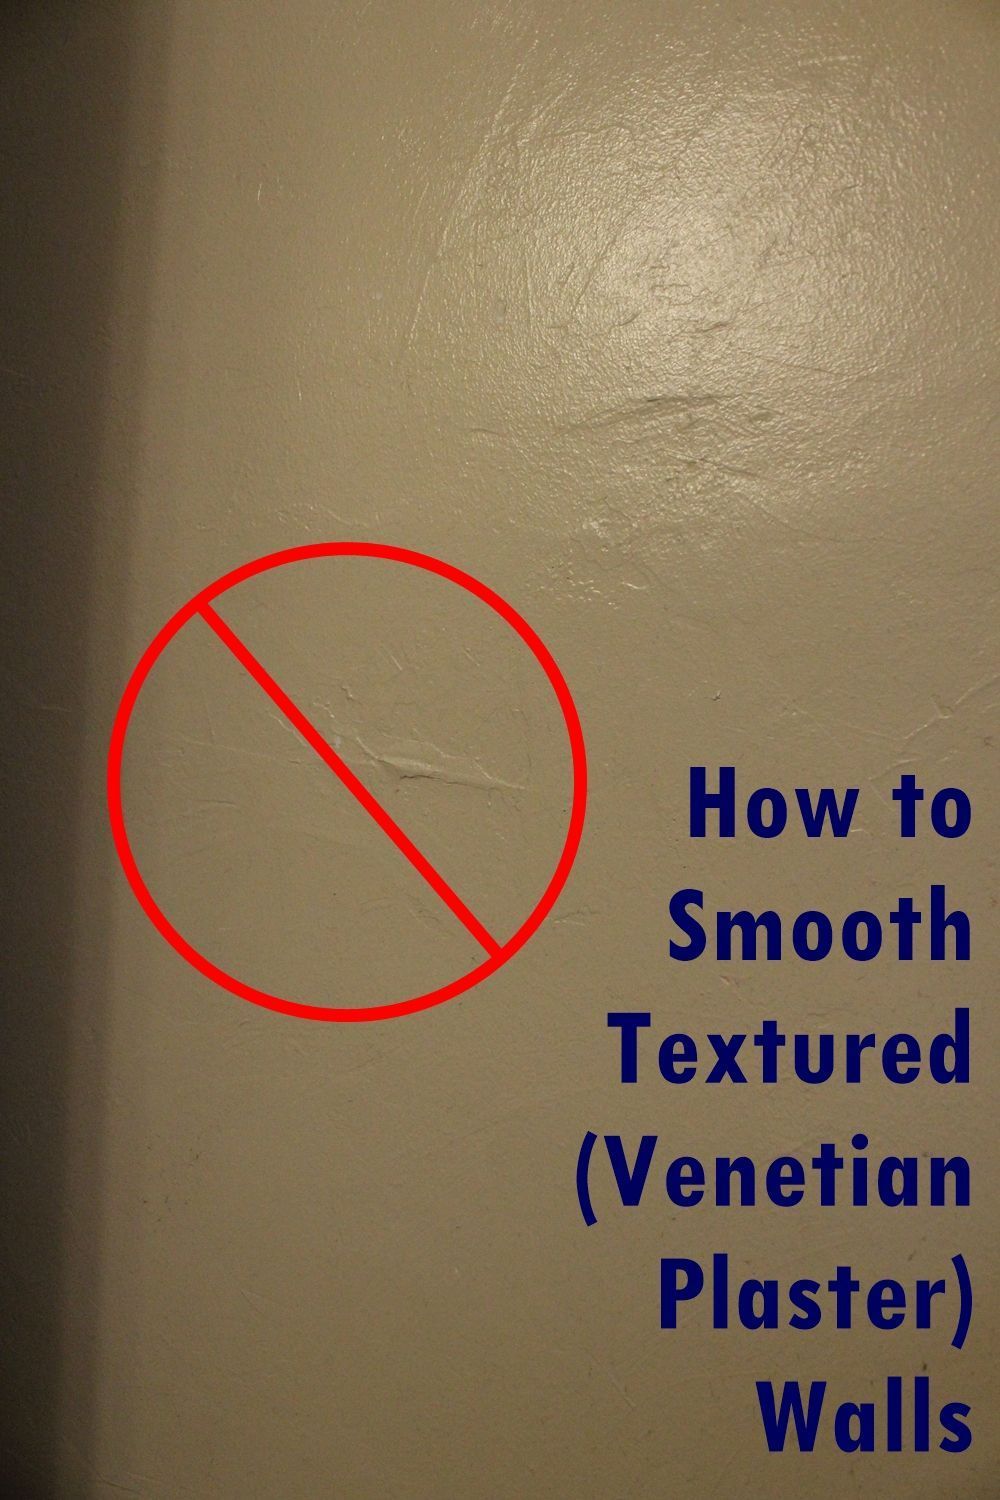 How to Smooth Textured Venetian Plaster Walls